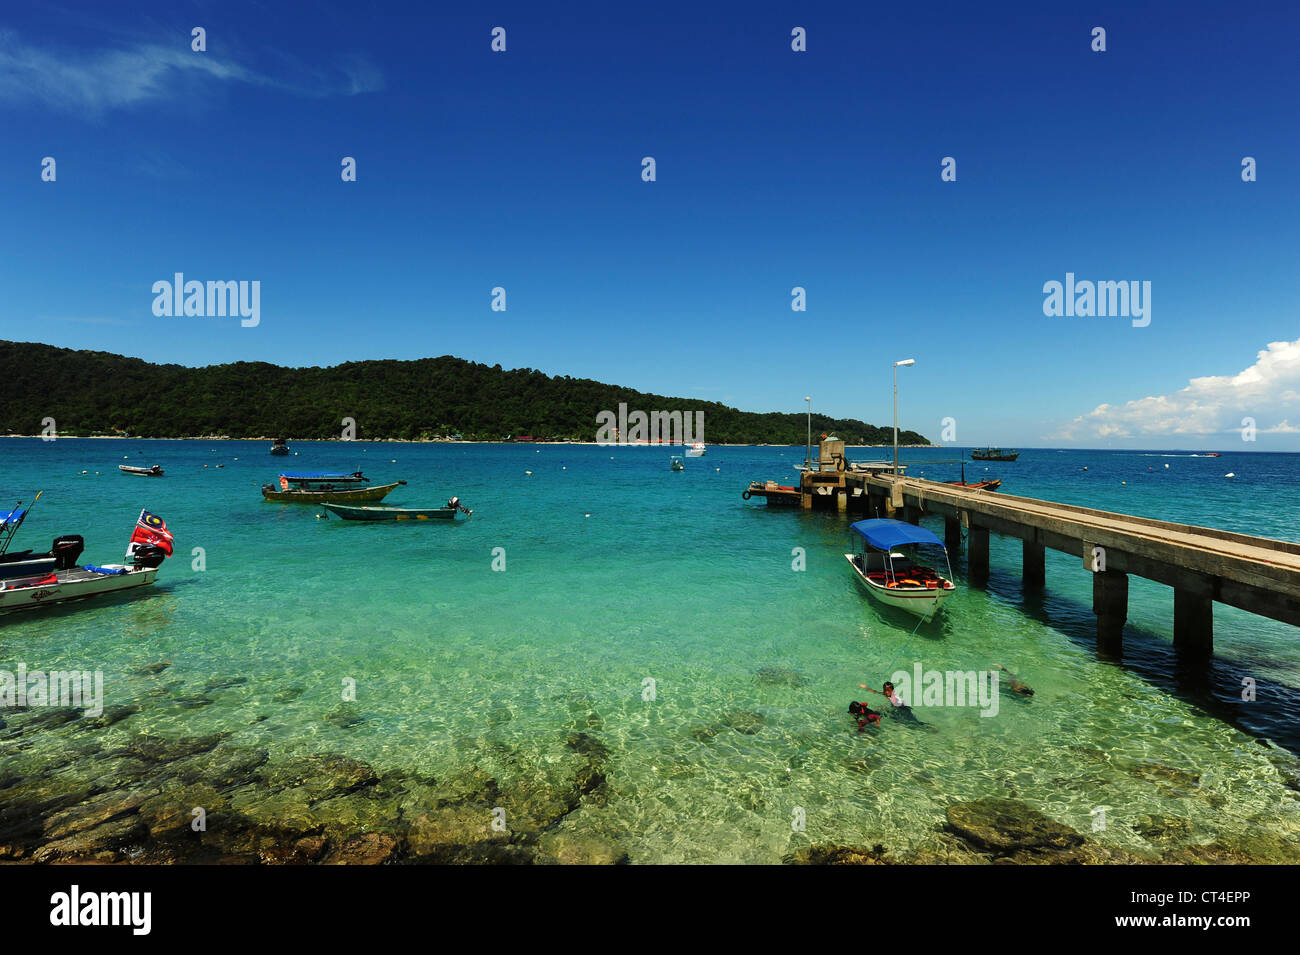 Malaysia, Perhentian Islands, Perhentian Kecil, pontoon into transparent turquoise see Stock Photo